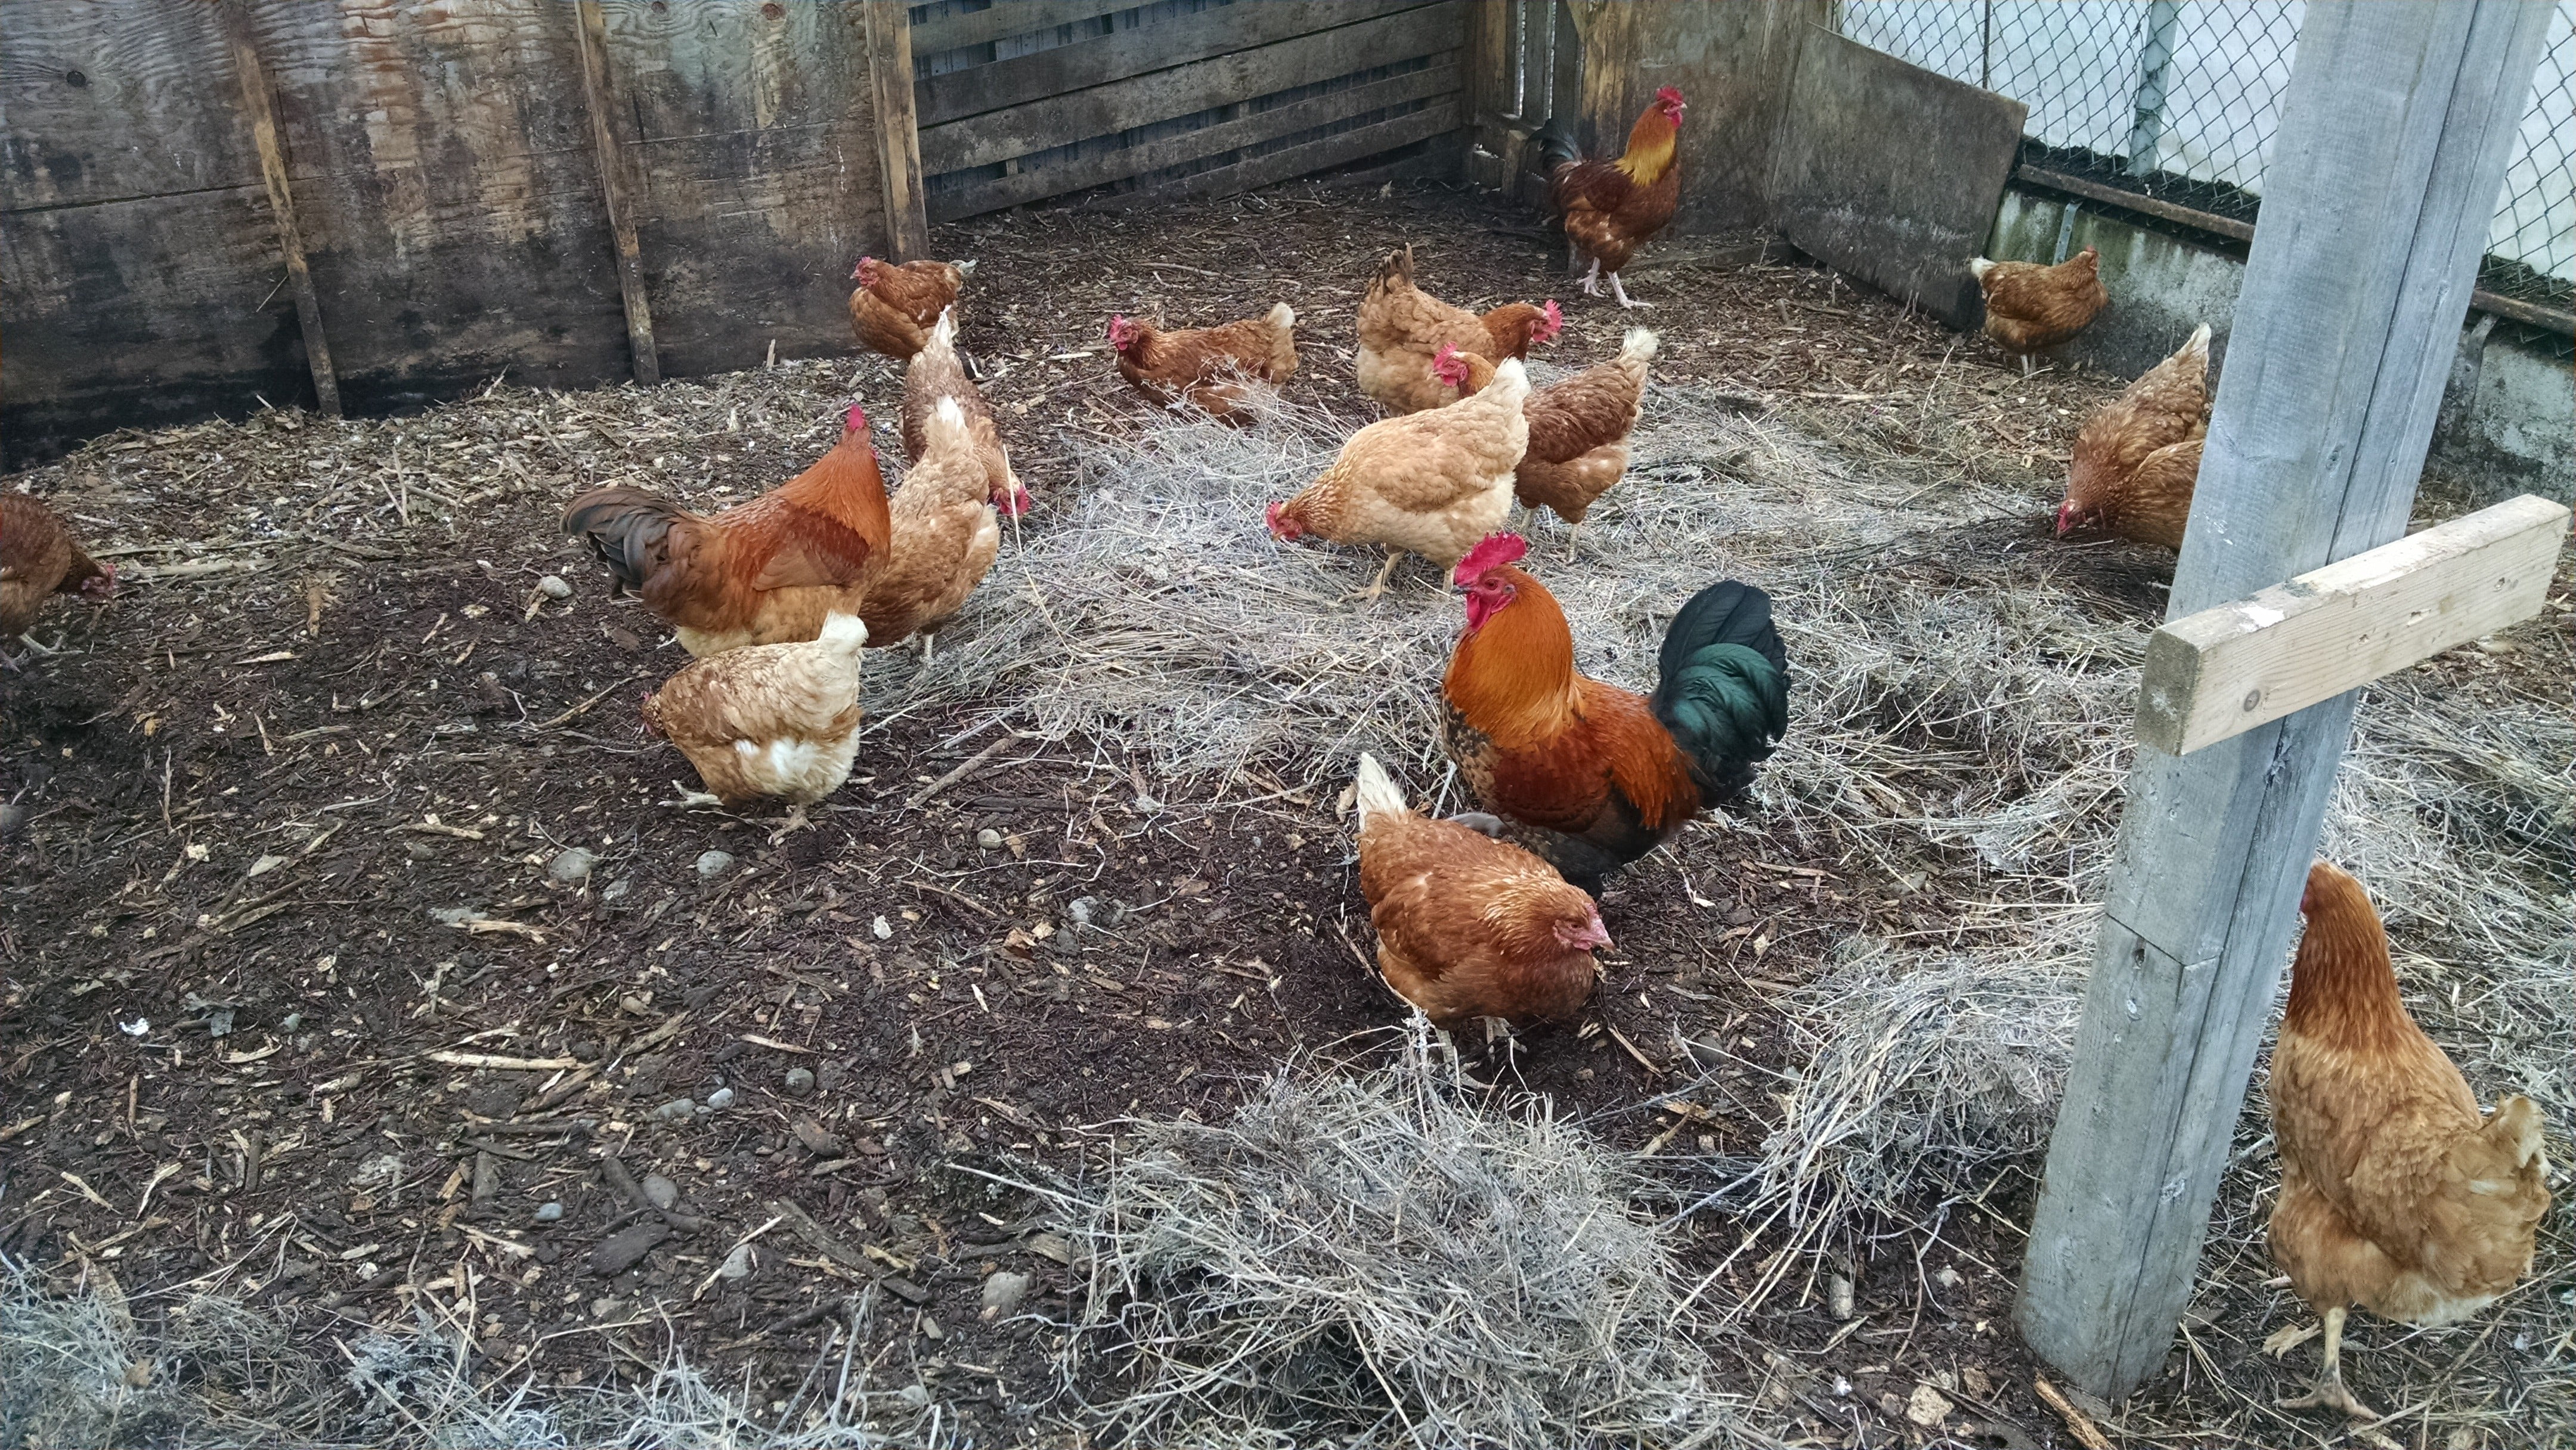 Yes , we have too many roosters. I need to make a butcher appointment for five roosters and a few older hens.